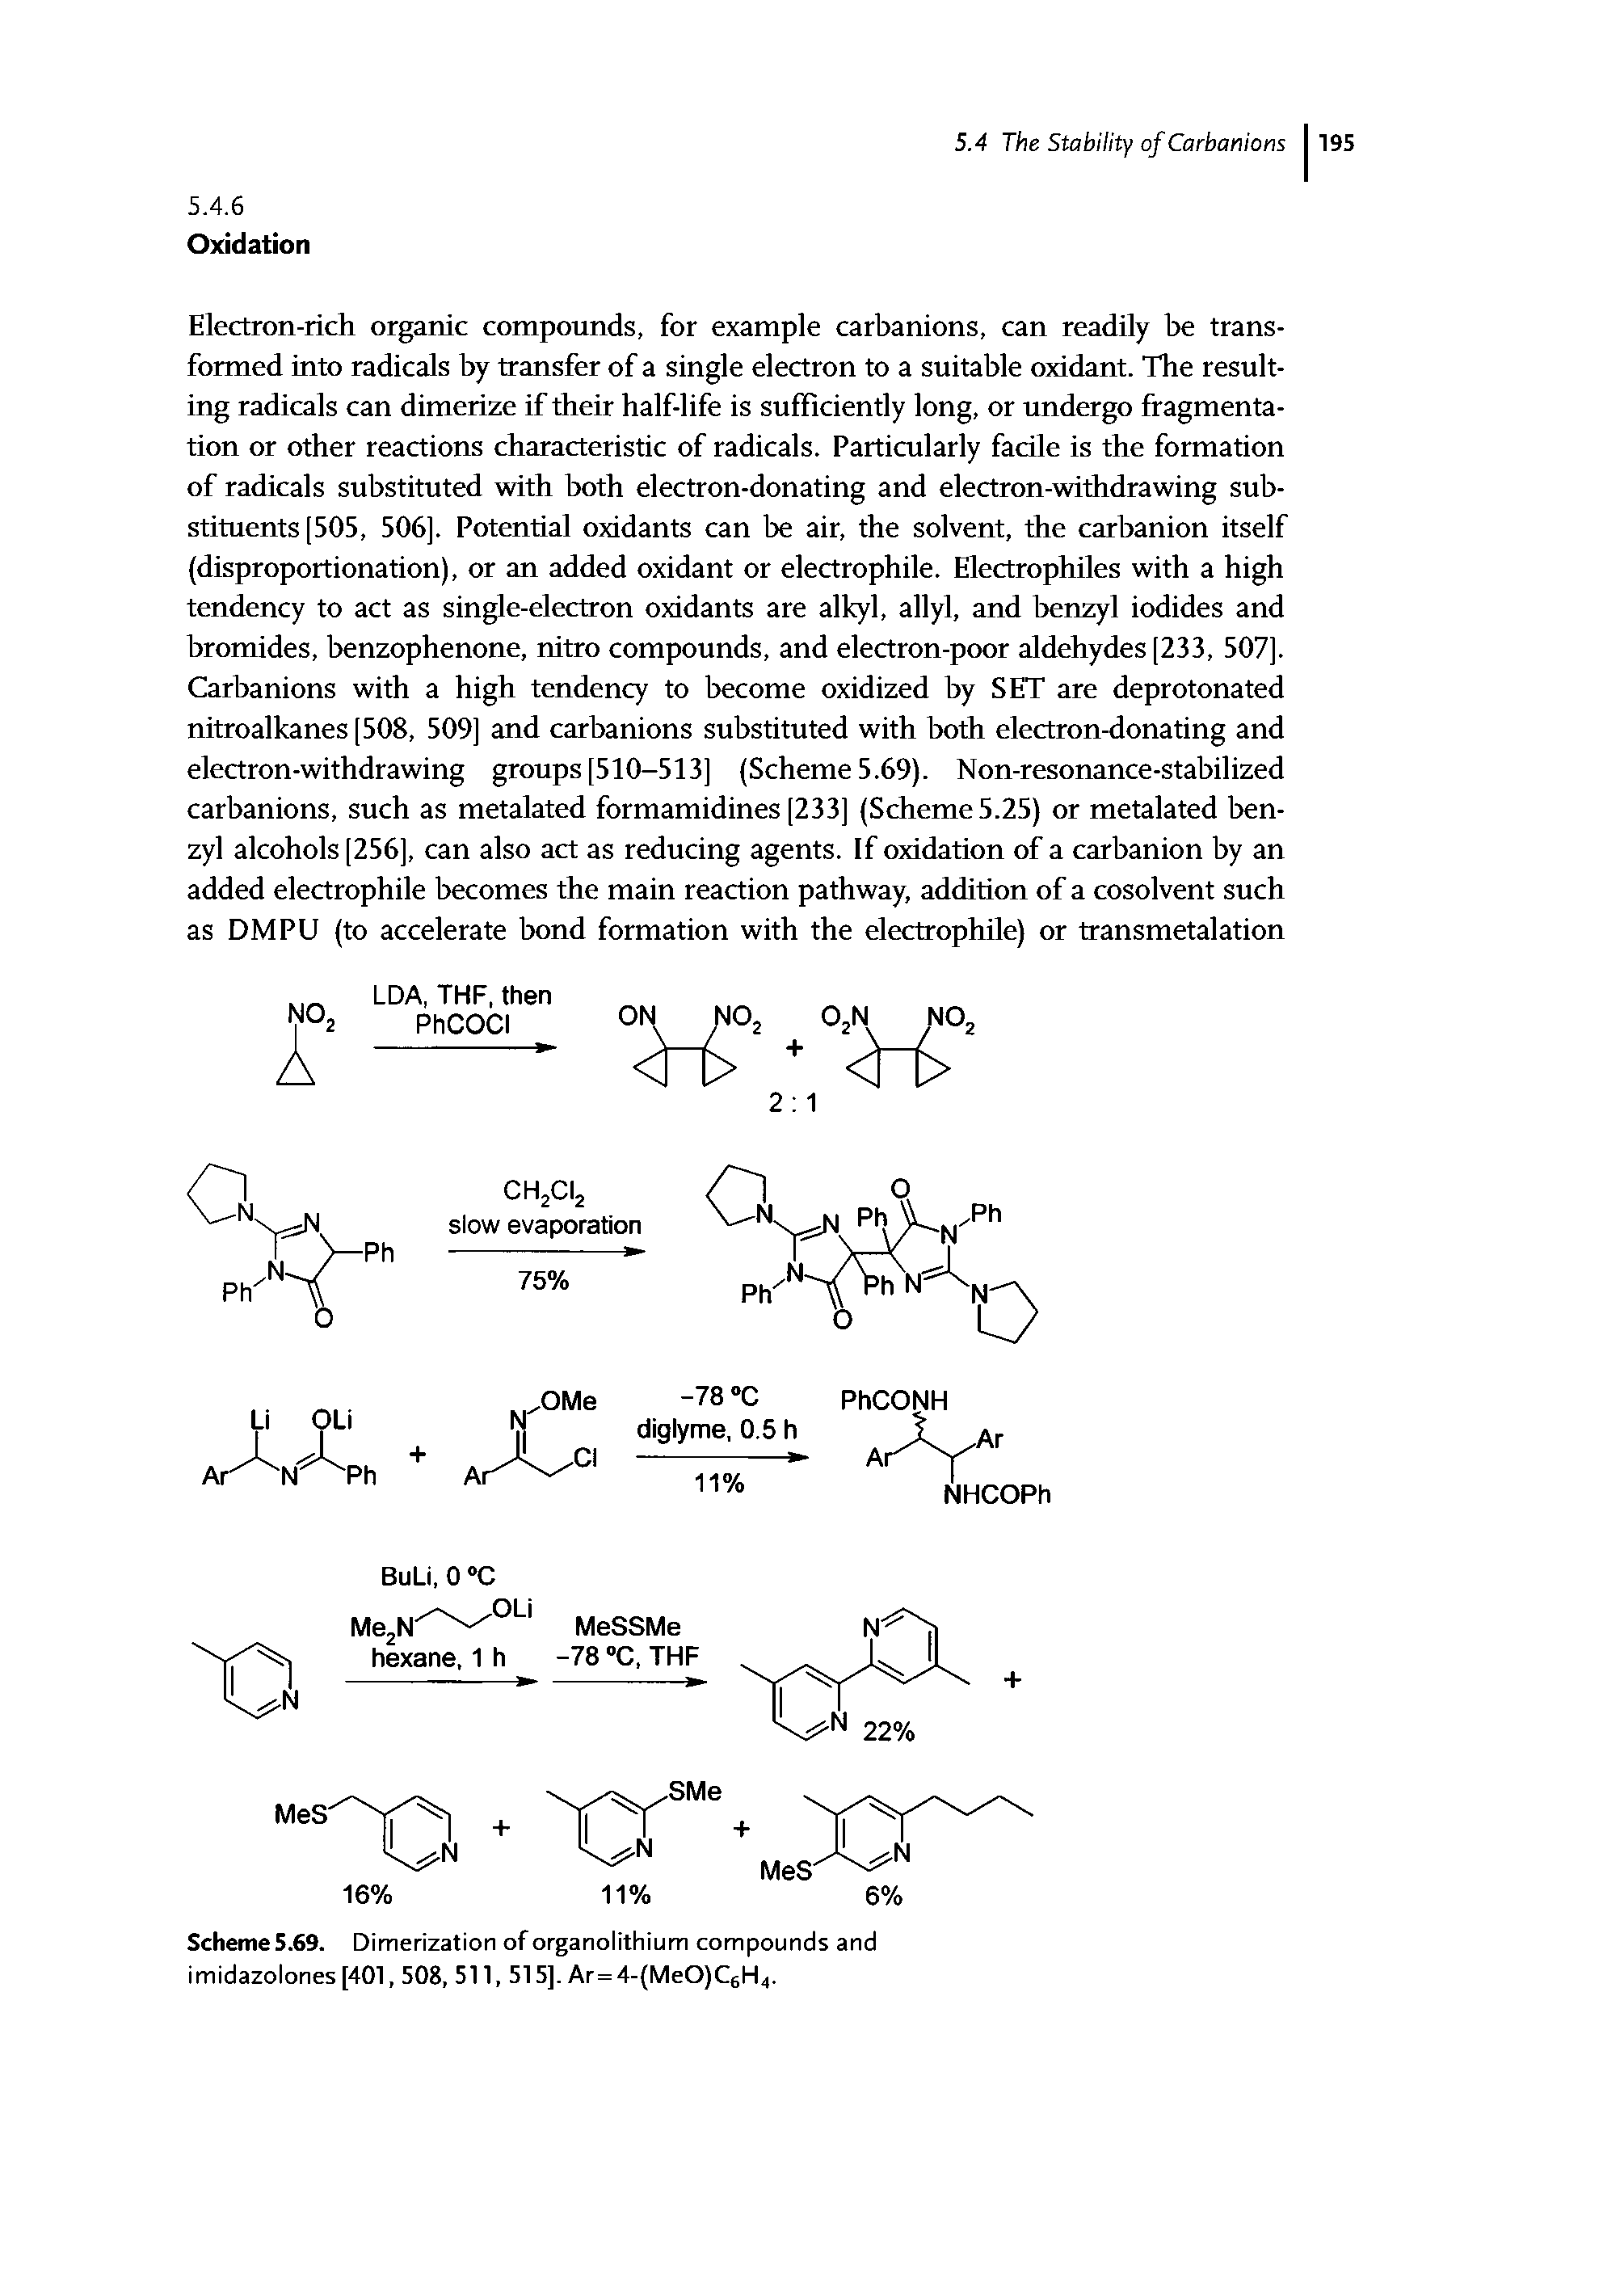 Scheme5.69. Dimerization of organolithium compounds and imidazolones[401,508, 511, 515], Ar=4-(MeO)C6H4.